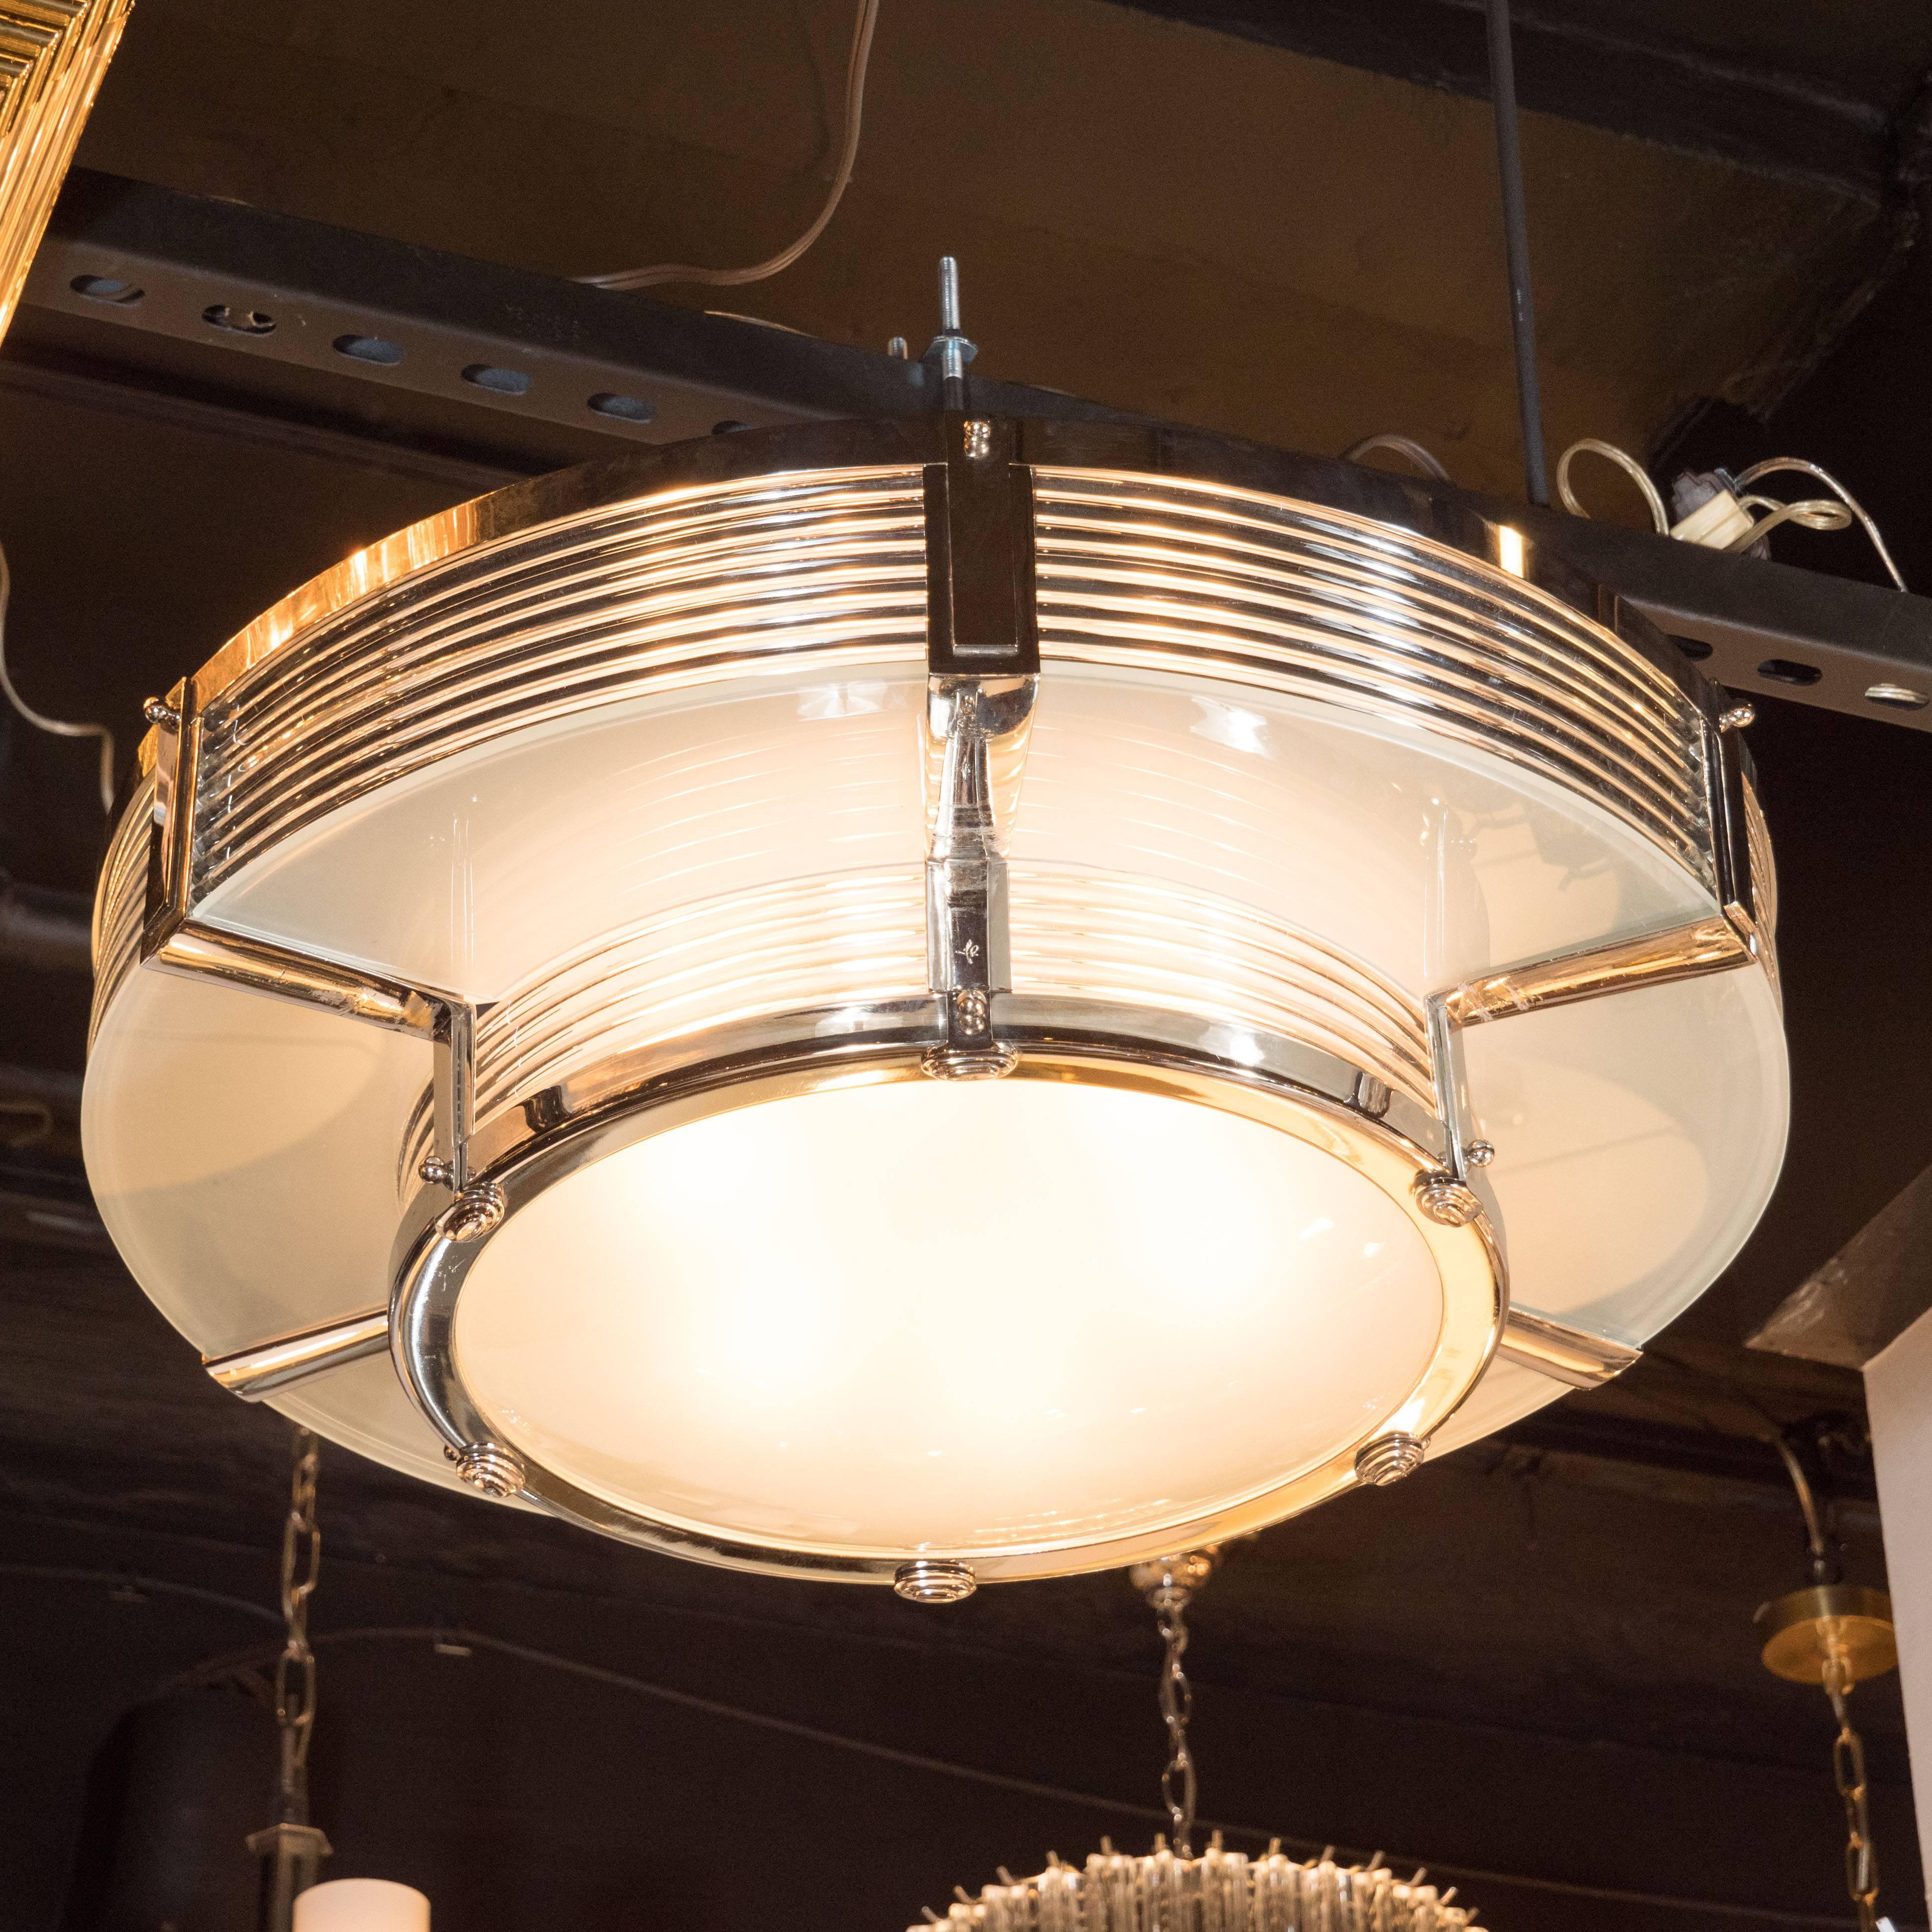 This sophisticated chandelier was realized in France, in the manner of Atelier Petitot. It offers the machine age details and clean, streamlined design that enthusiasts of fine Art deco design adore. It consists of two tiers with frosted glass